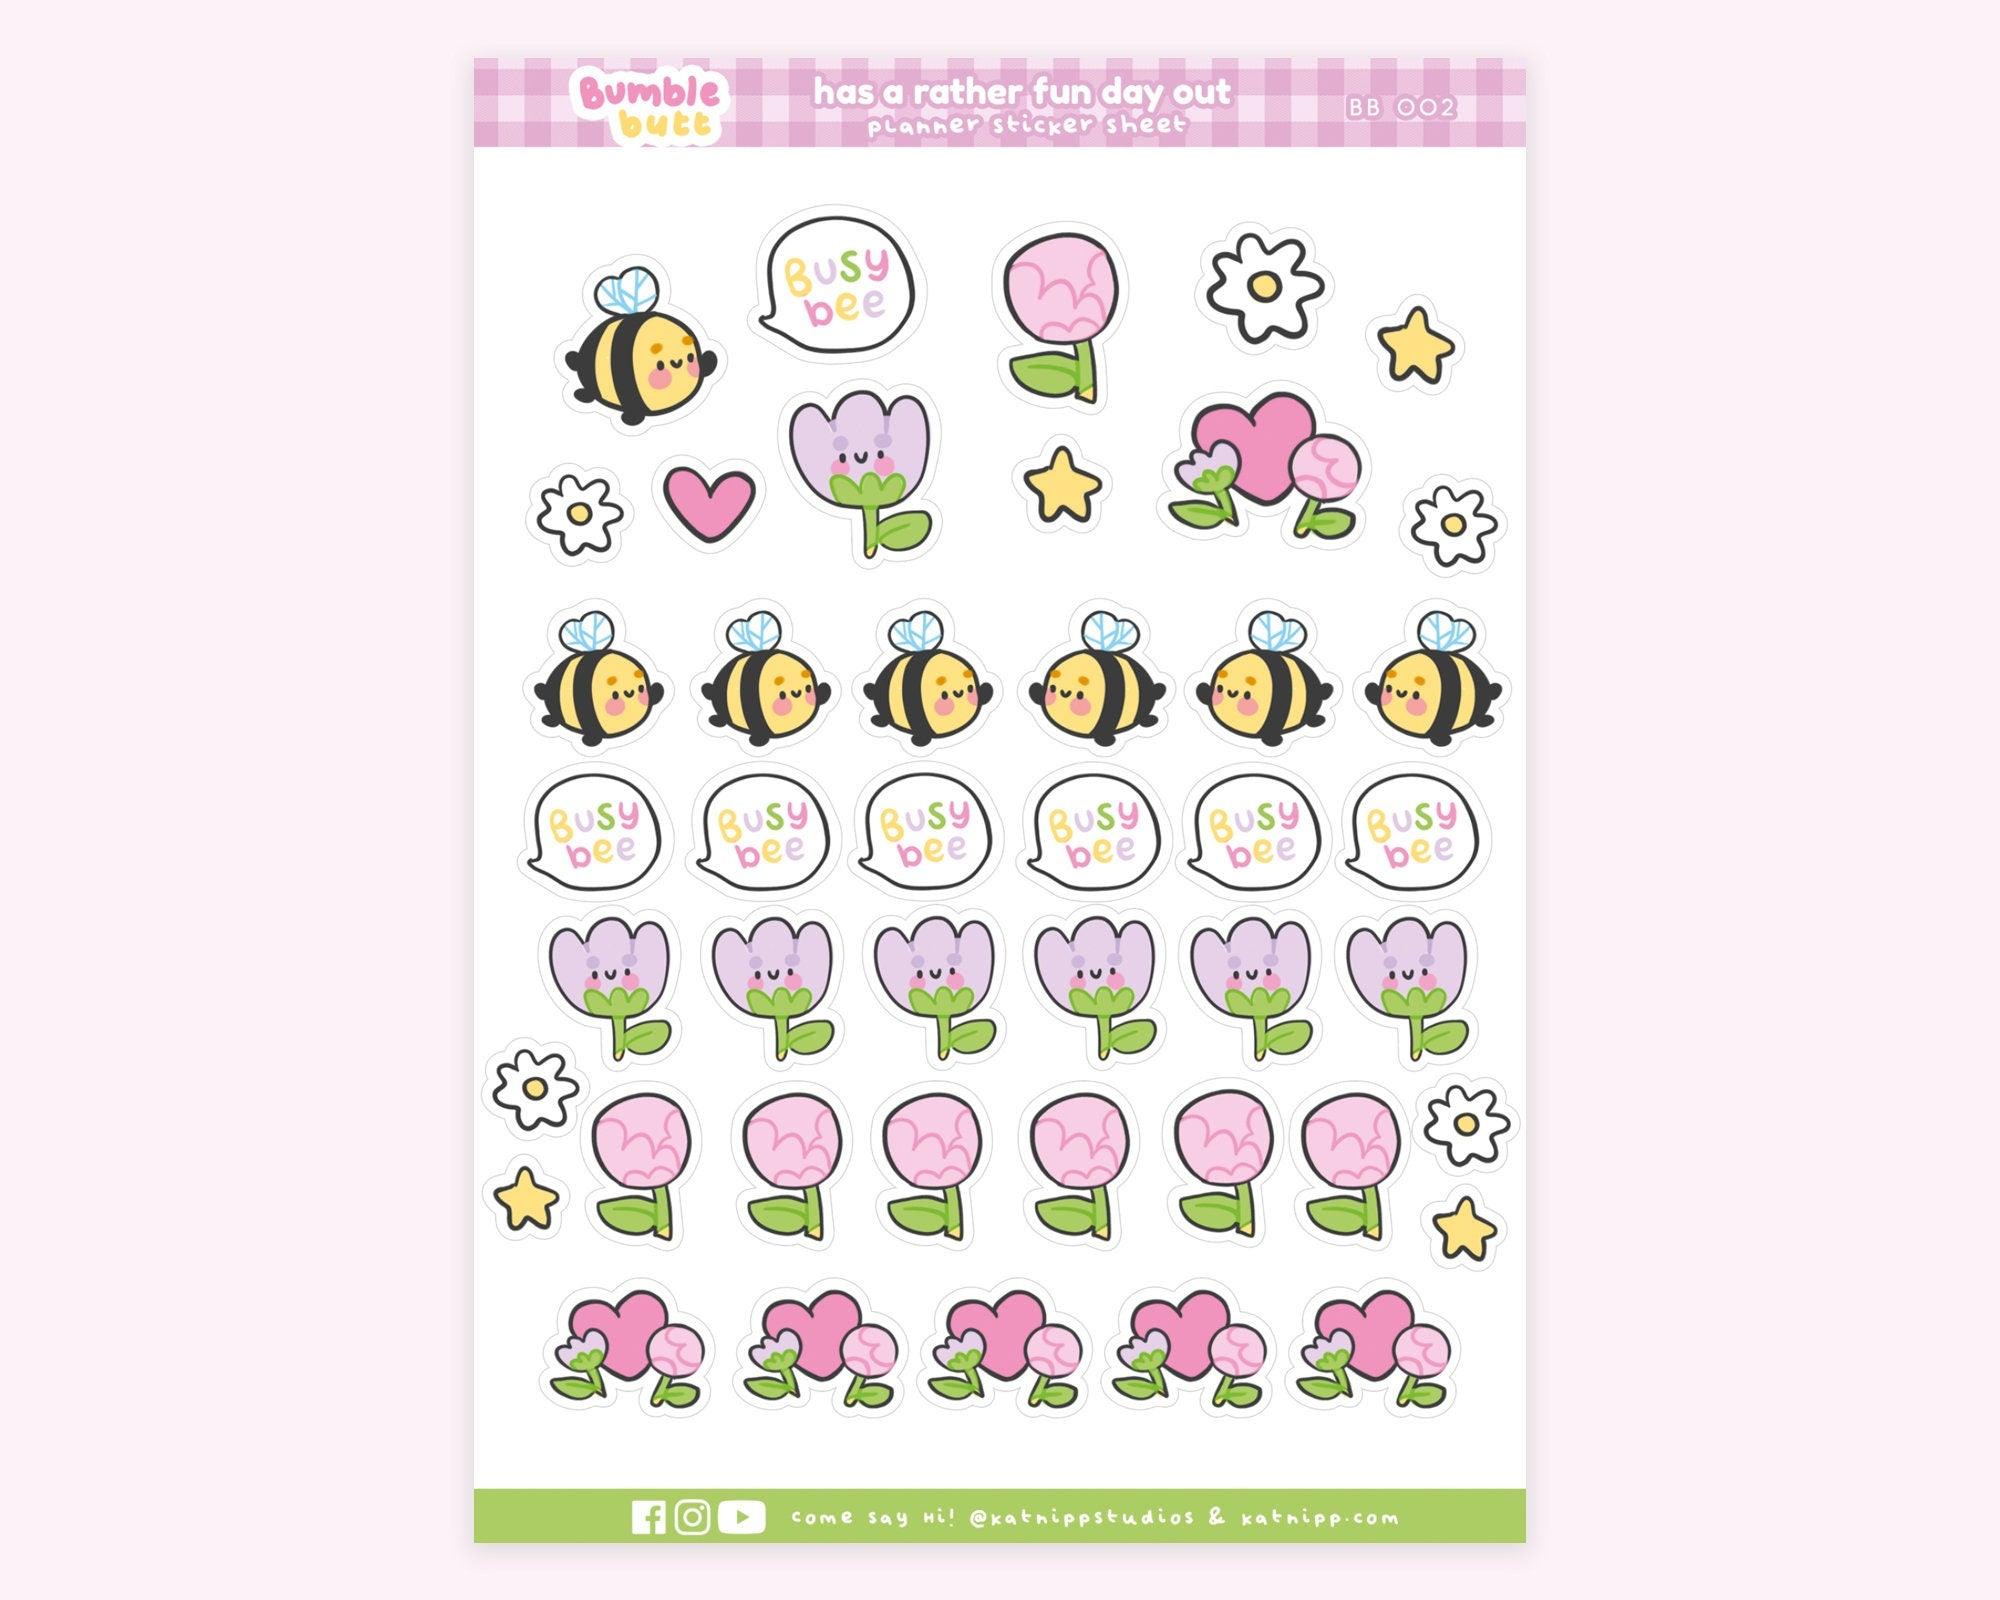 Adorable bumblebee planner stickers crafted on A6 premium paper with vinyl sticker material, perfect for decorating planners and scrapbooks. 2